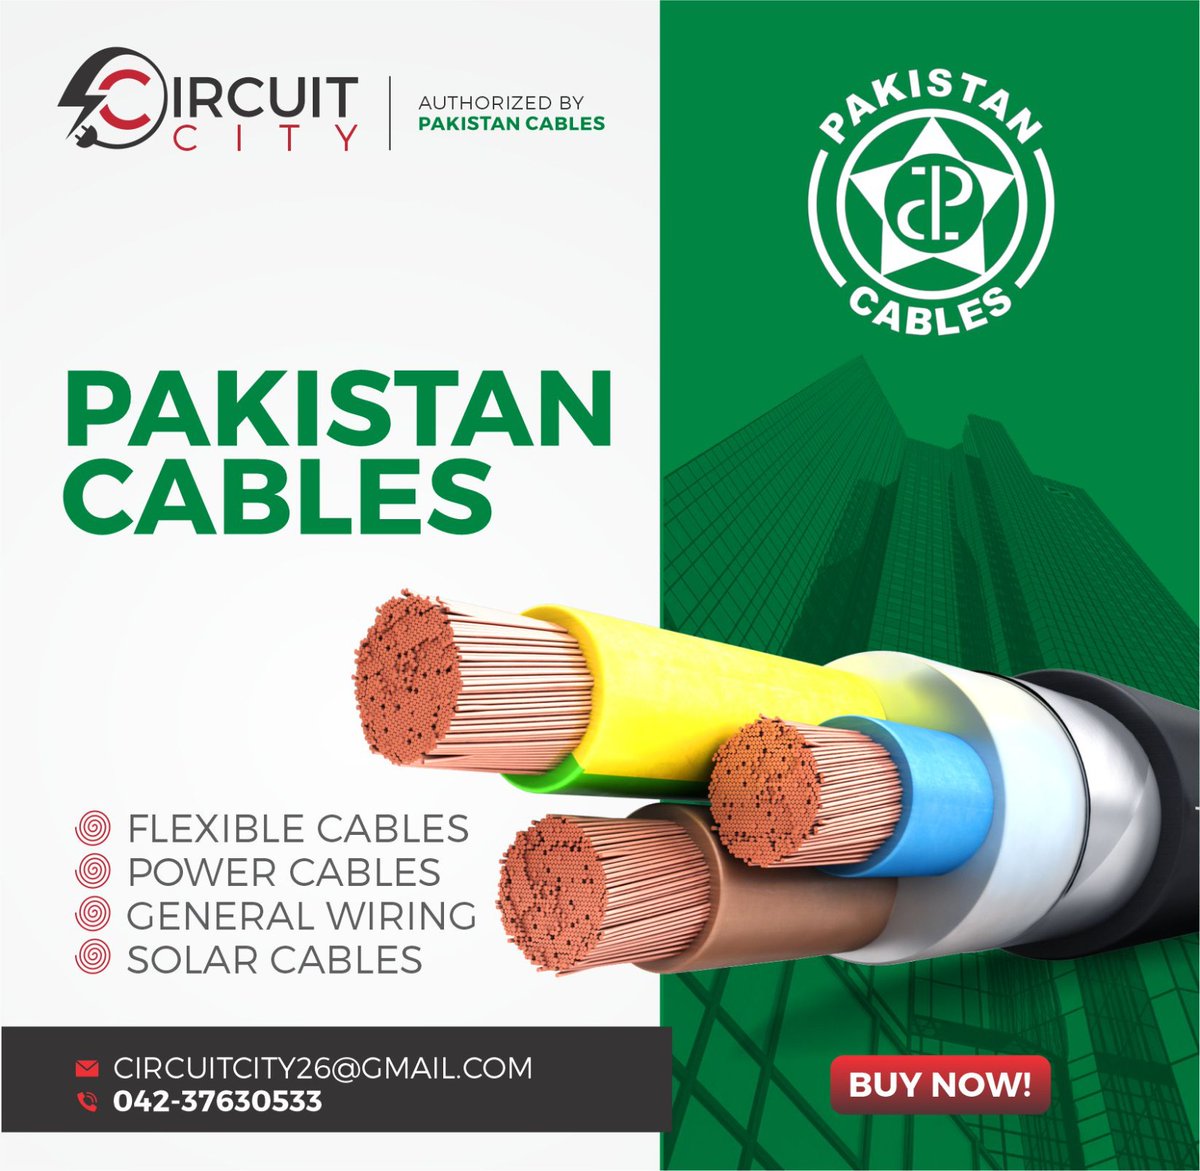 Circuit City is an authorized dealer of Pakistan Cables having large amount of available stock.
#PakistanCables #PowerCable #FlexibleCable #GeneralWiring #SolarCable #CircuitCity #BrandrethRoad #BeadonRoad #Dealership #AuthorizedDealer